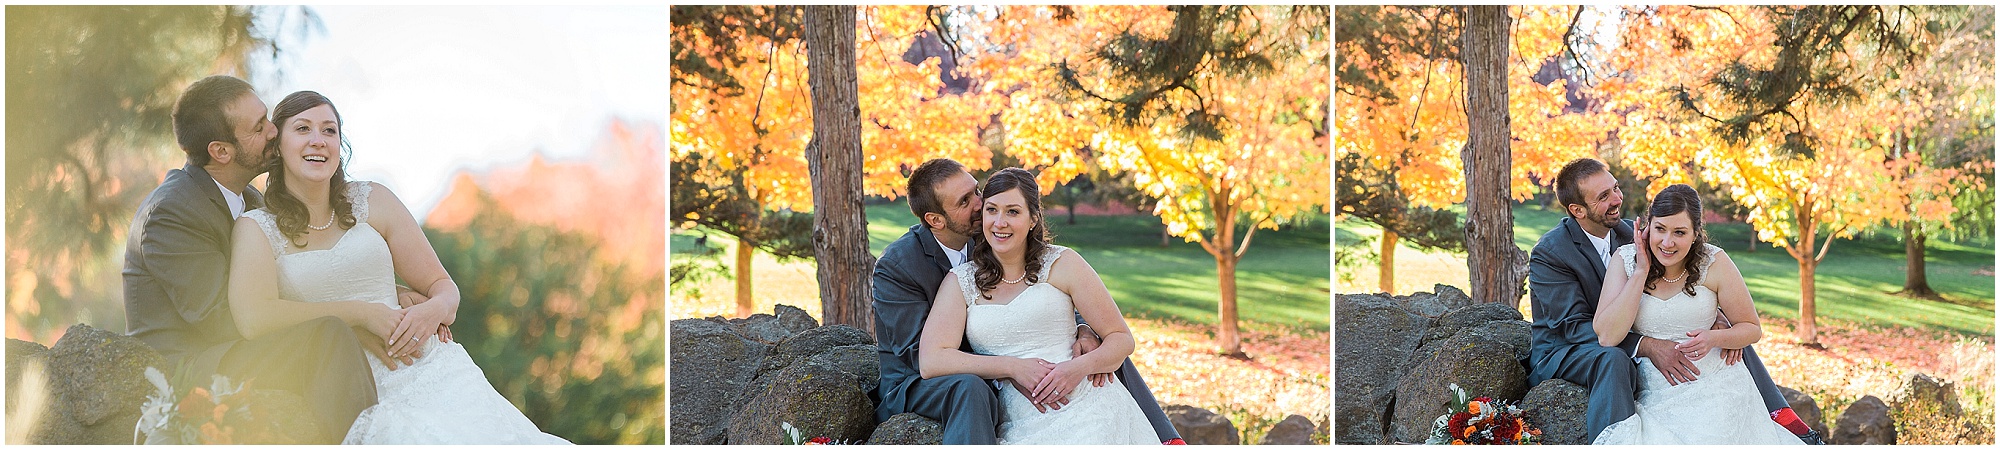 The fall color at Hollinshead Park is a gorgeous place for romantic portraits of your wedding day in Bend, OR. | Erica Swantek Photography